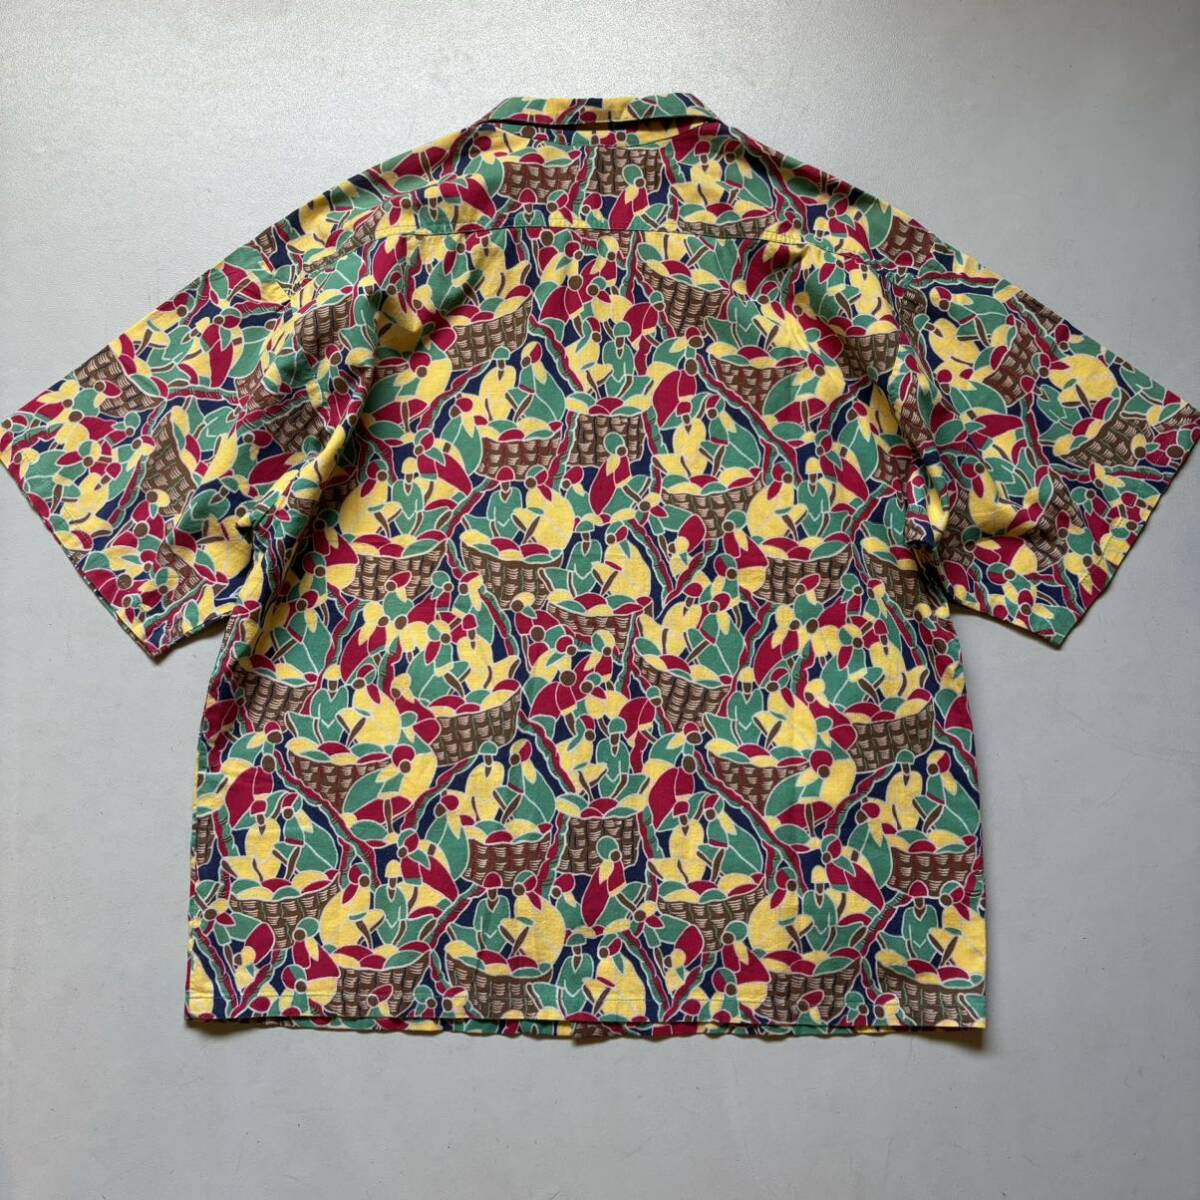 KINO All-over pattern S/S shirt “size L” “made in France” 総柄シャツ 半袖シャツ フランス製_画像7